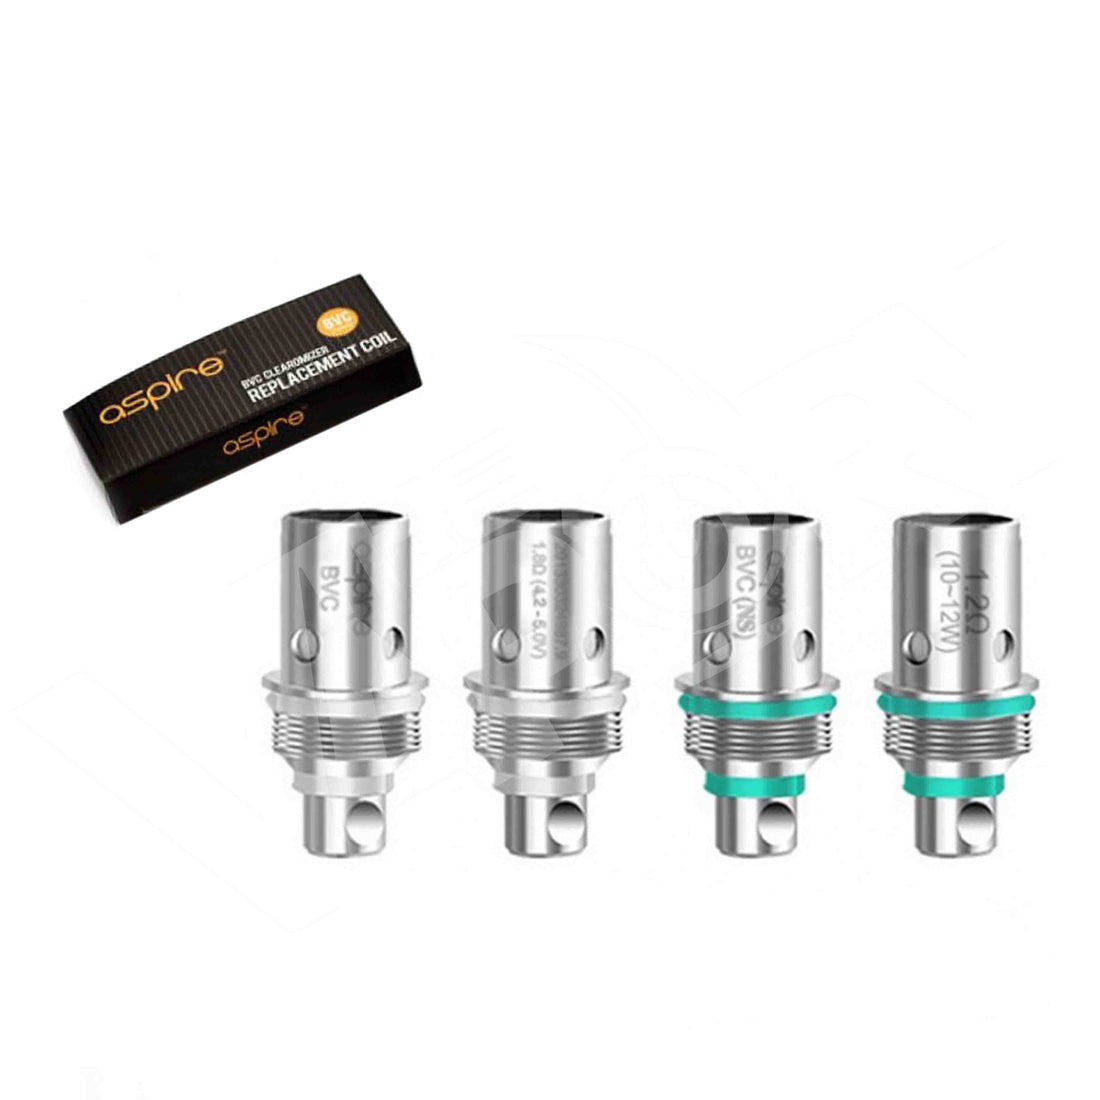 ASPIRE SPRYTE OR K1 REPLACEMENT COILS REPLACEMENT COILS Pacific Smoke 